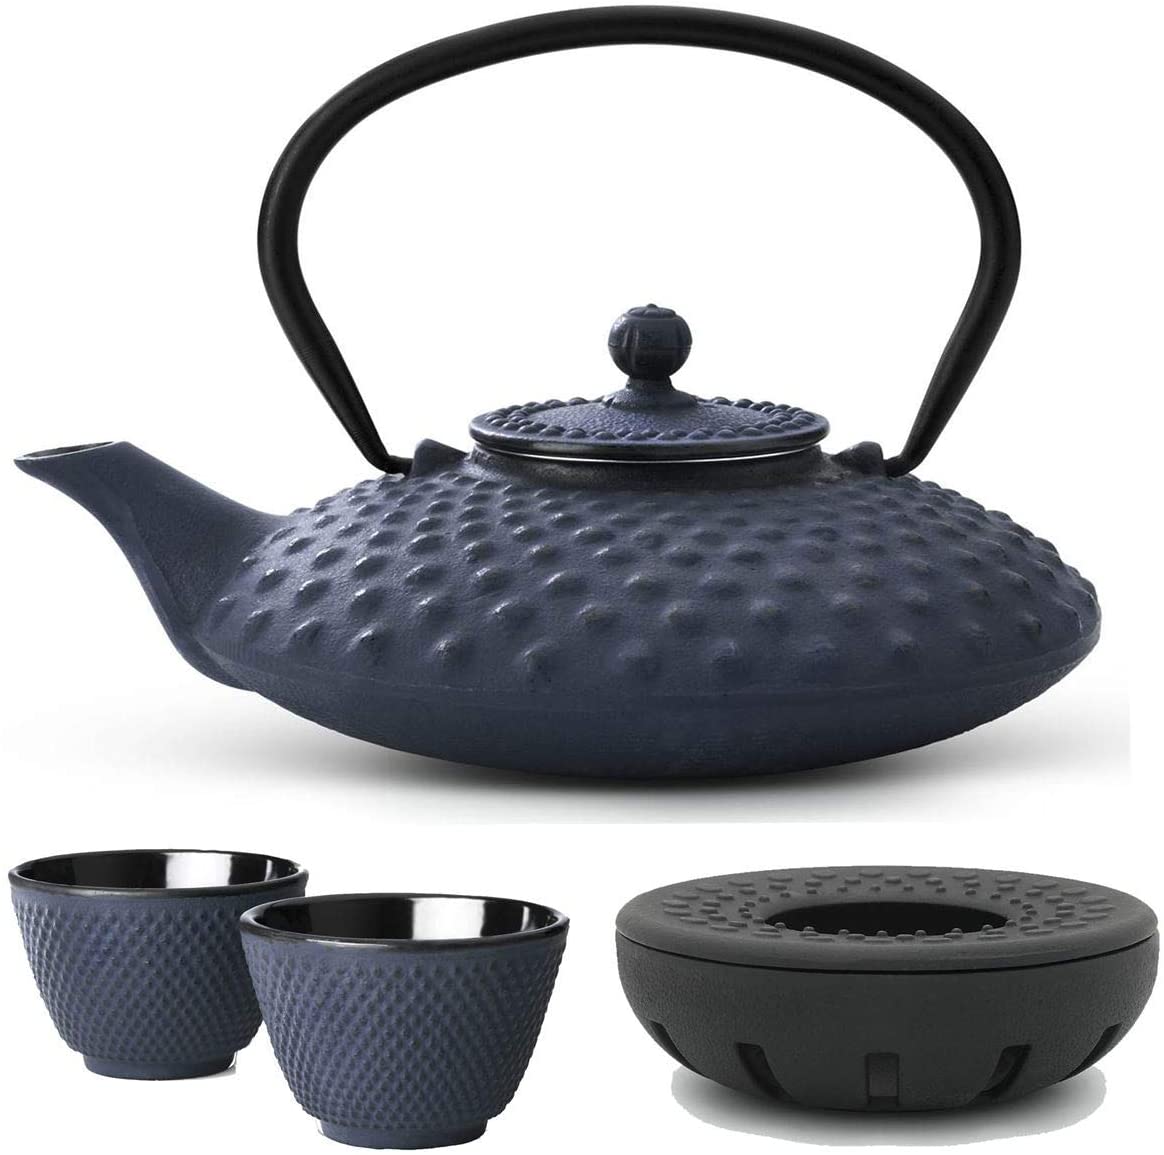 Bredemeijer Teapot Asian Cast Iron Set Blue 0.8 Litres with Tea Filter Strainer and Warmer Including Tea Cup